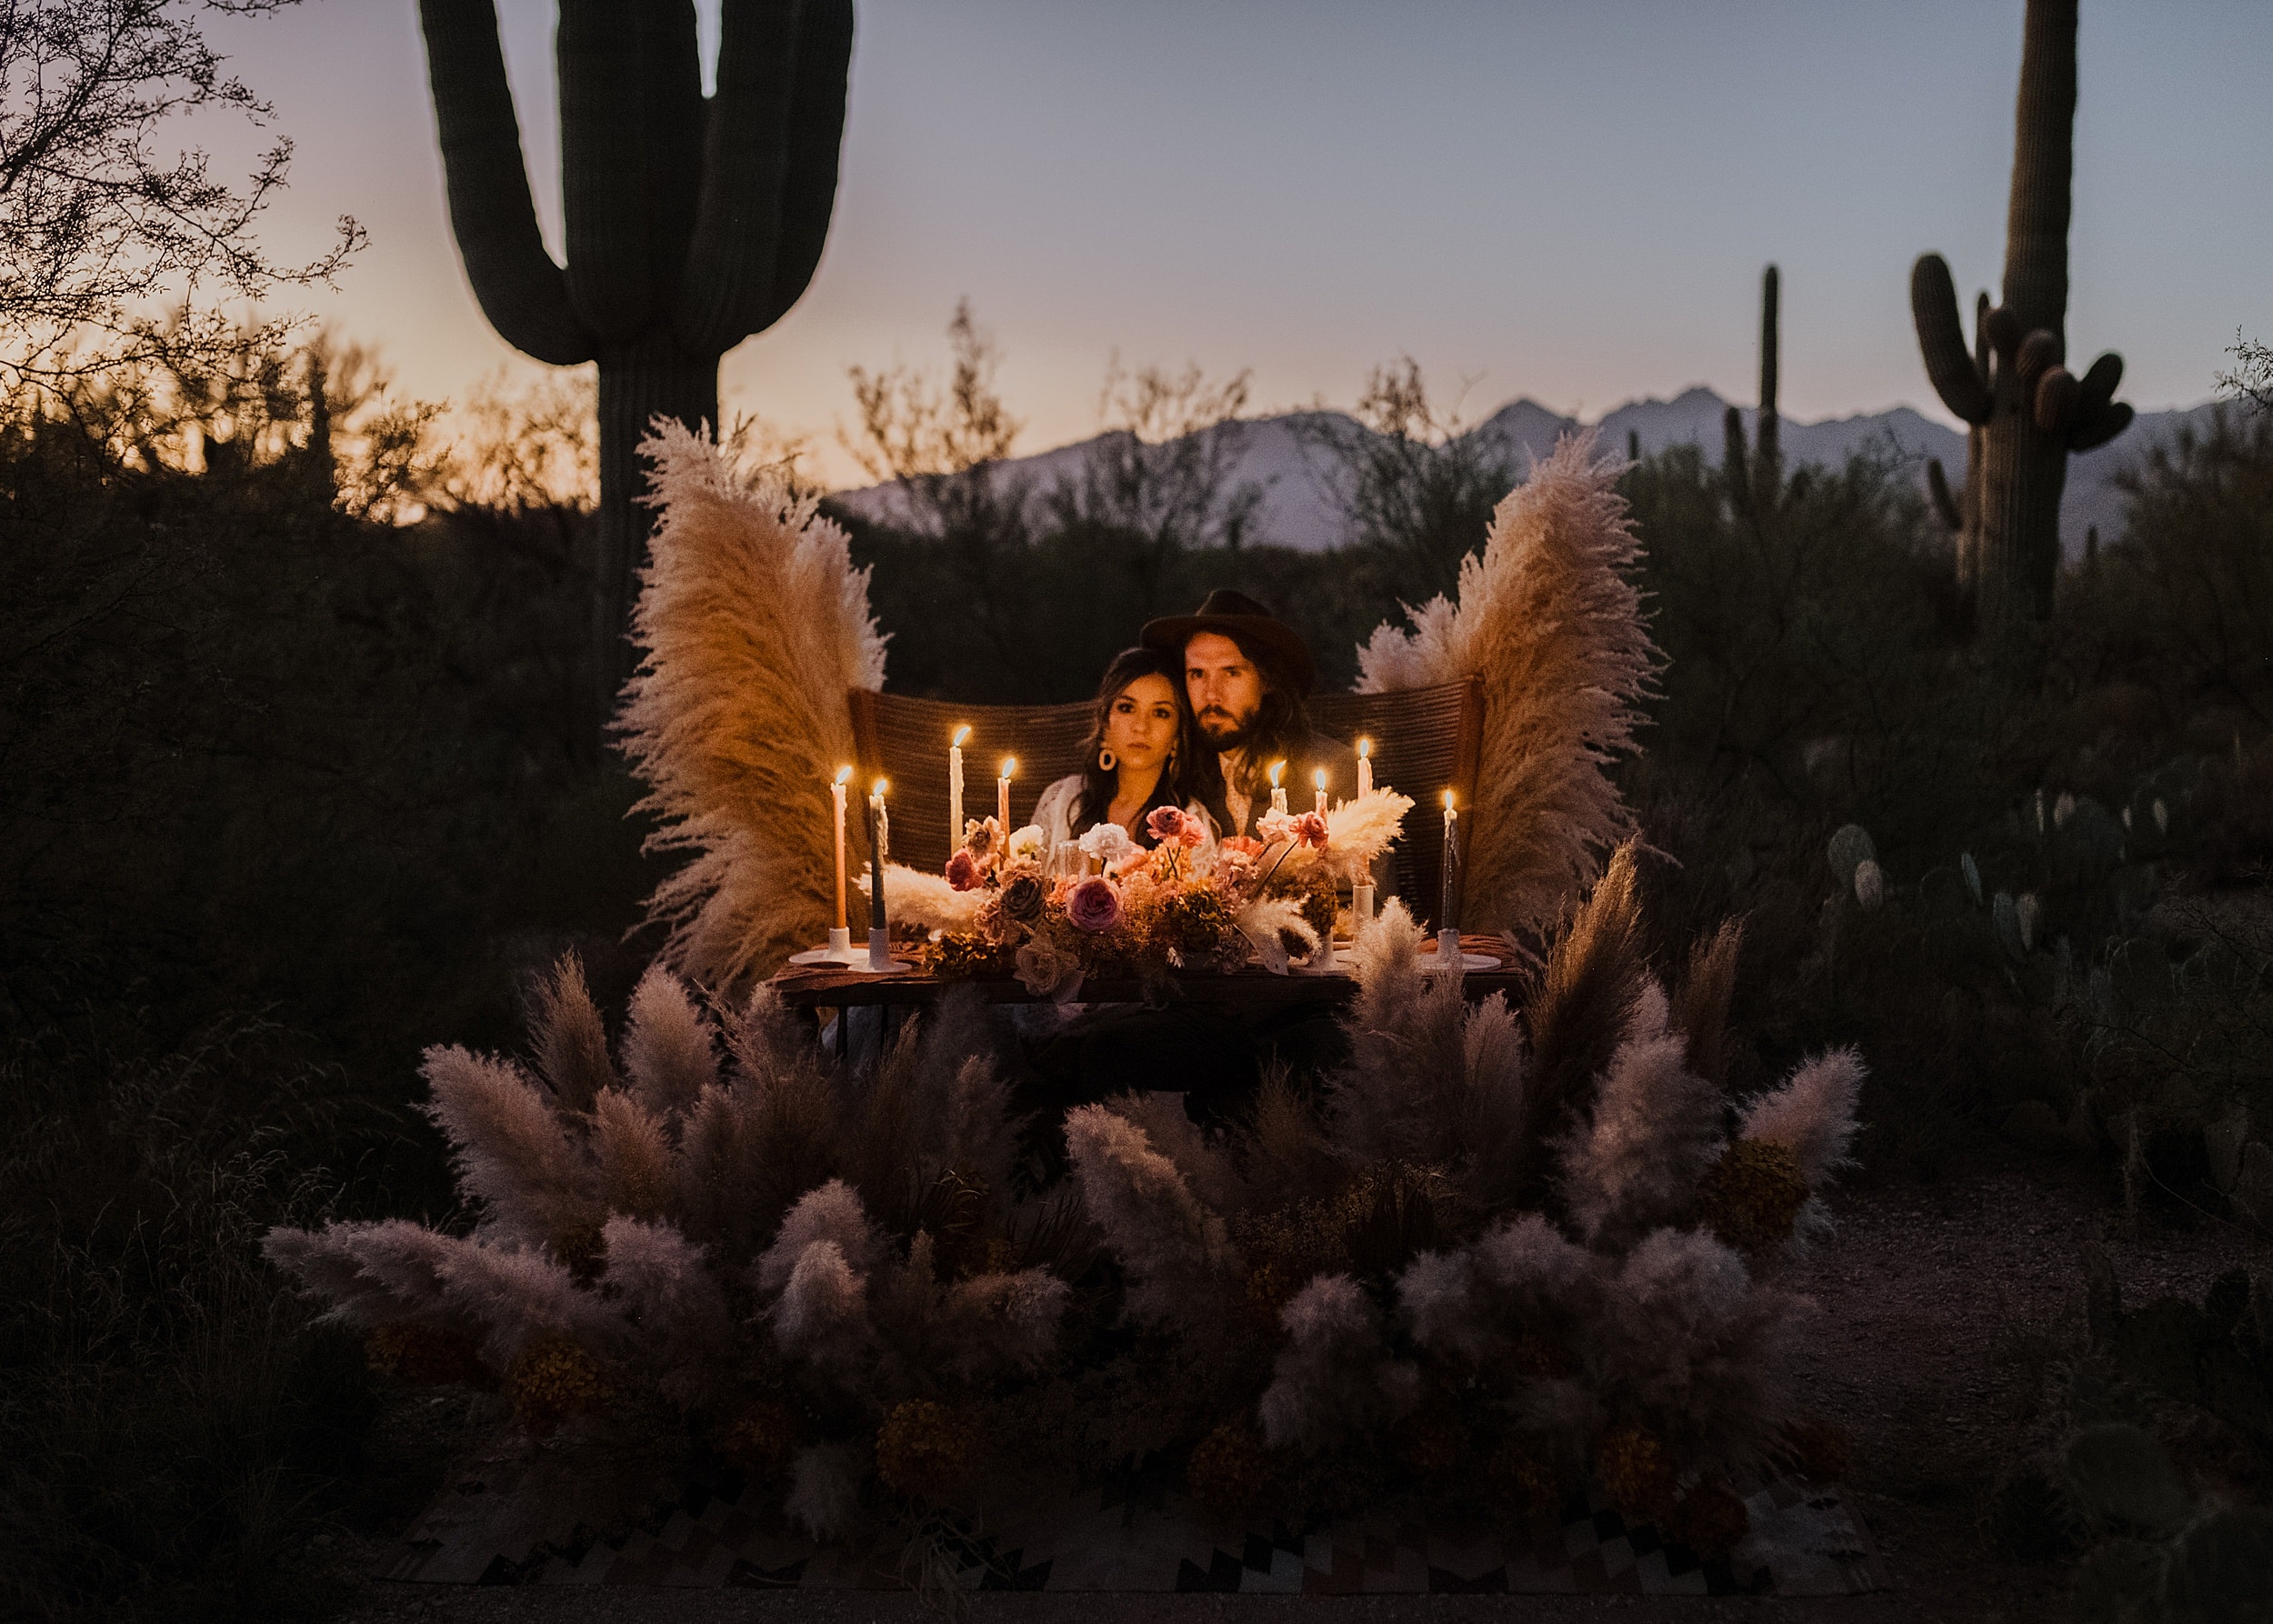 couple sitting in arrangement with candle light in evening at saguaro national park 